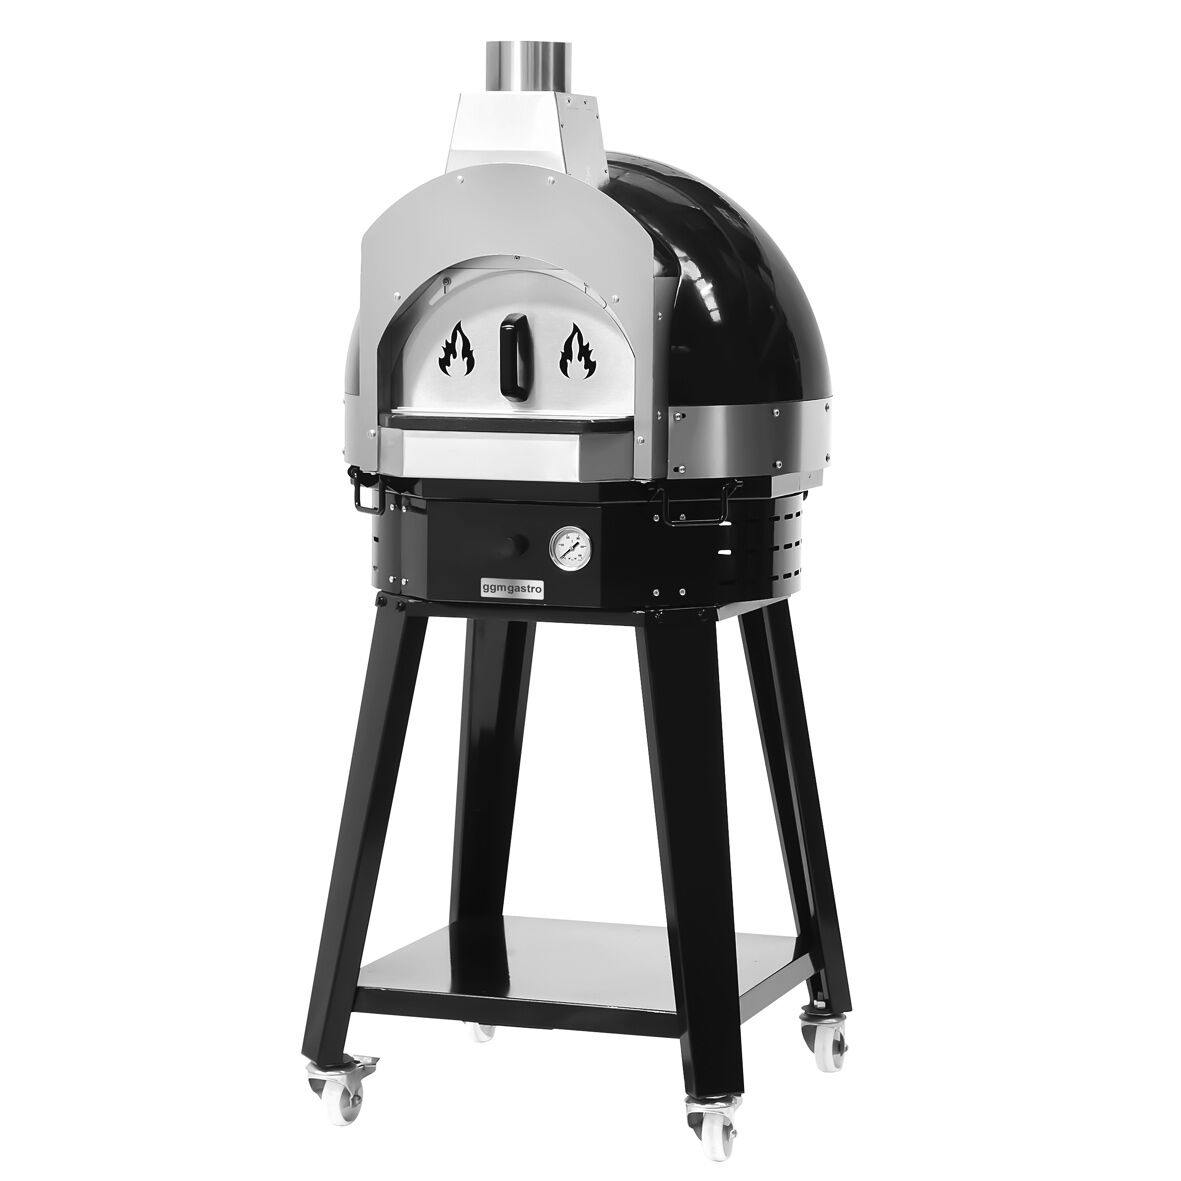 Wooden Pizza Oven Black - incl. base - height: 0.77 m	